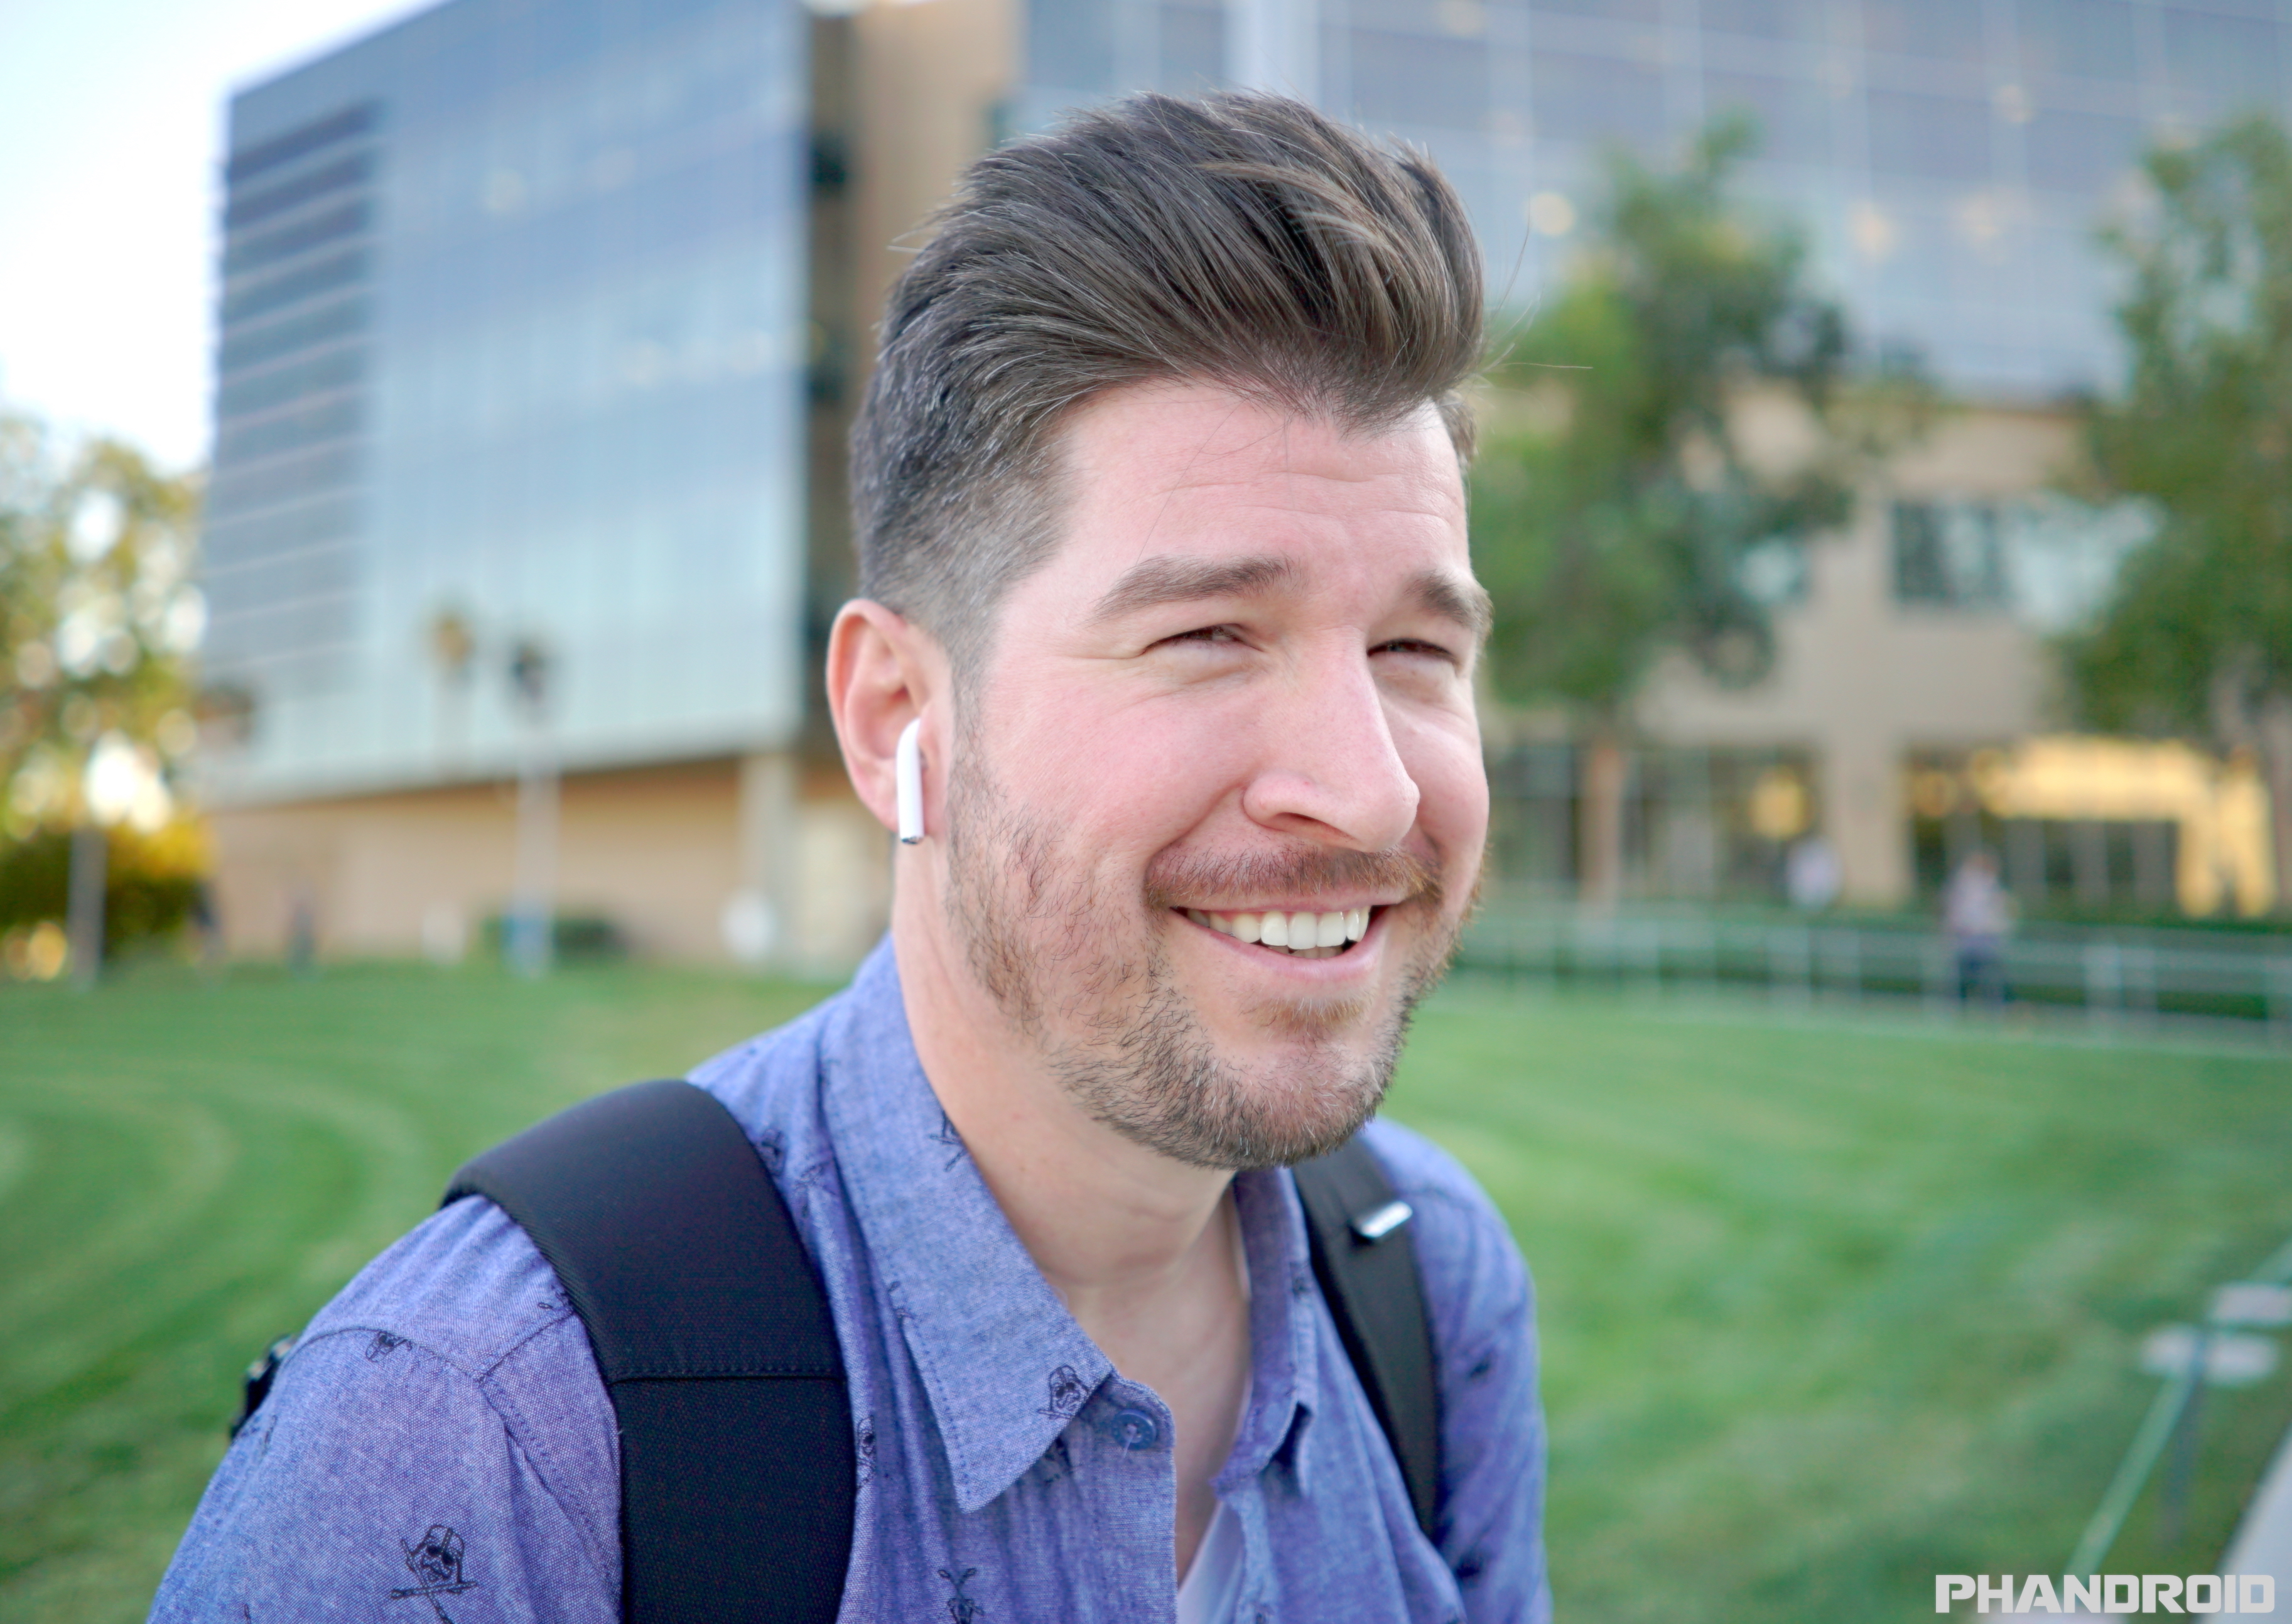 to use Apple's AirPods to activate the Google Assistant Samsung Bixby – Phandroid